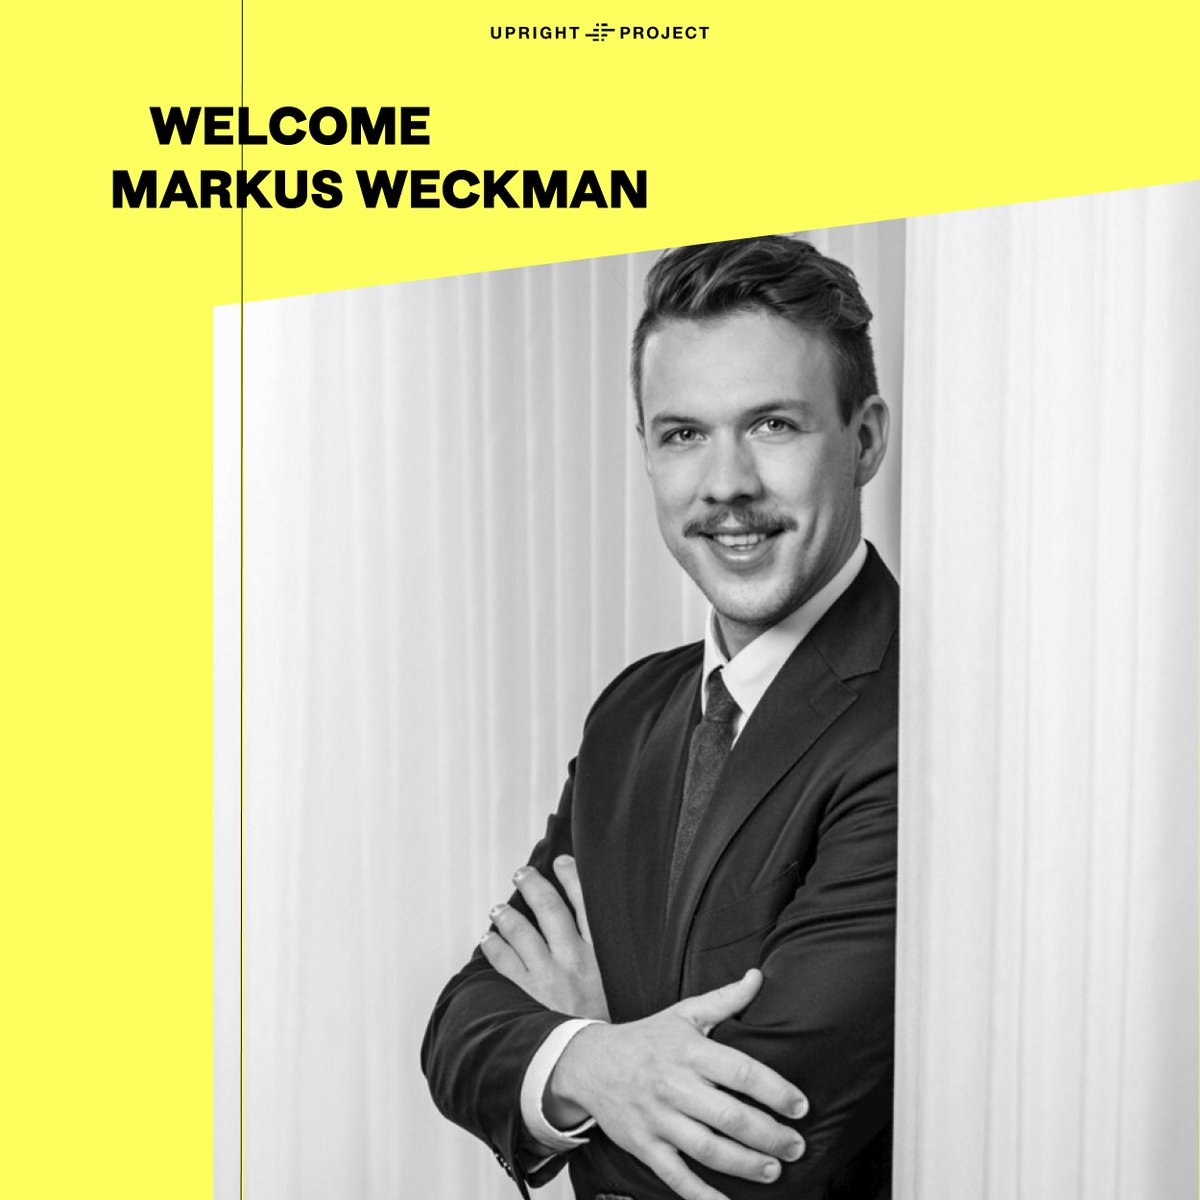 Upright’s team is growing! Join us in welcoming Markus Weckman as a Business Lead to the fearless net impact team. Before joining Upright, Markus worked as an Engagement Manager at McKinsey & Company’s Helsinki office. We are happy and excited to have you, Markus! https://t.co/9t05ENMt7h